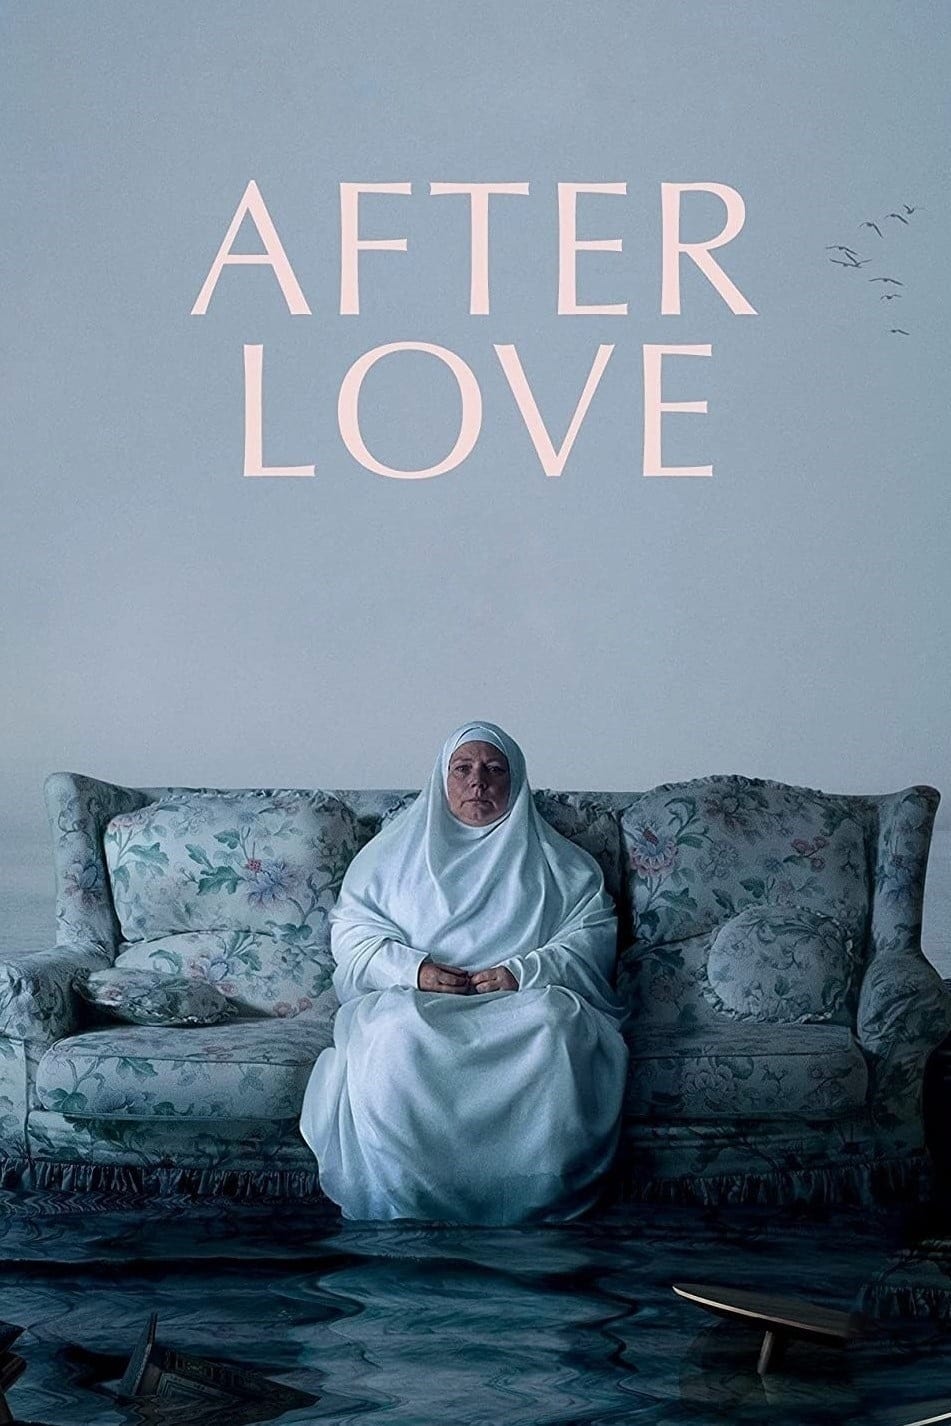 Poster for the movie "After Love"